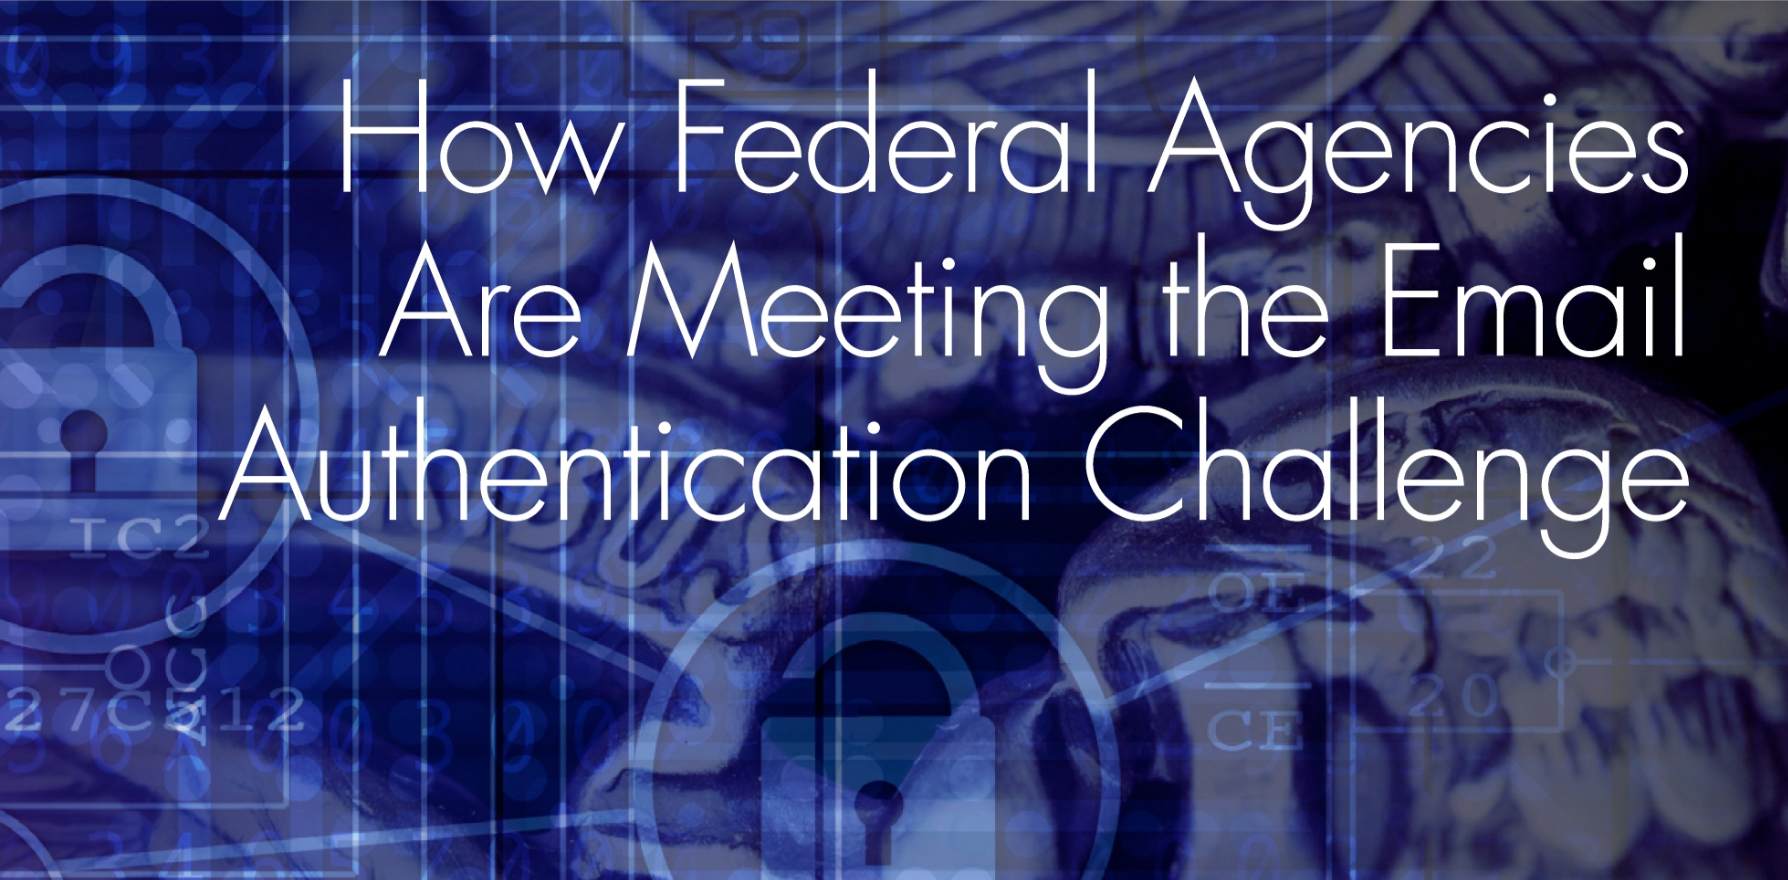 How Federal Agencies are Meeting the Email Authentication Challenge